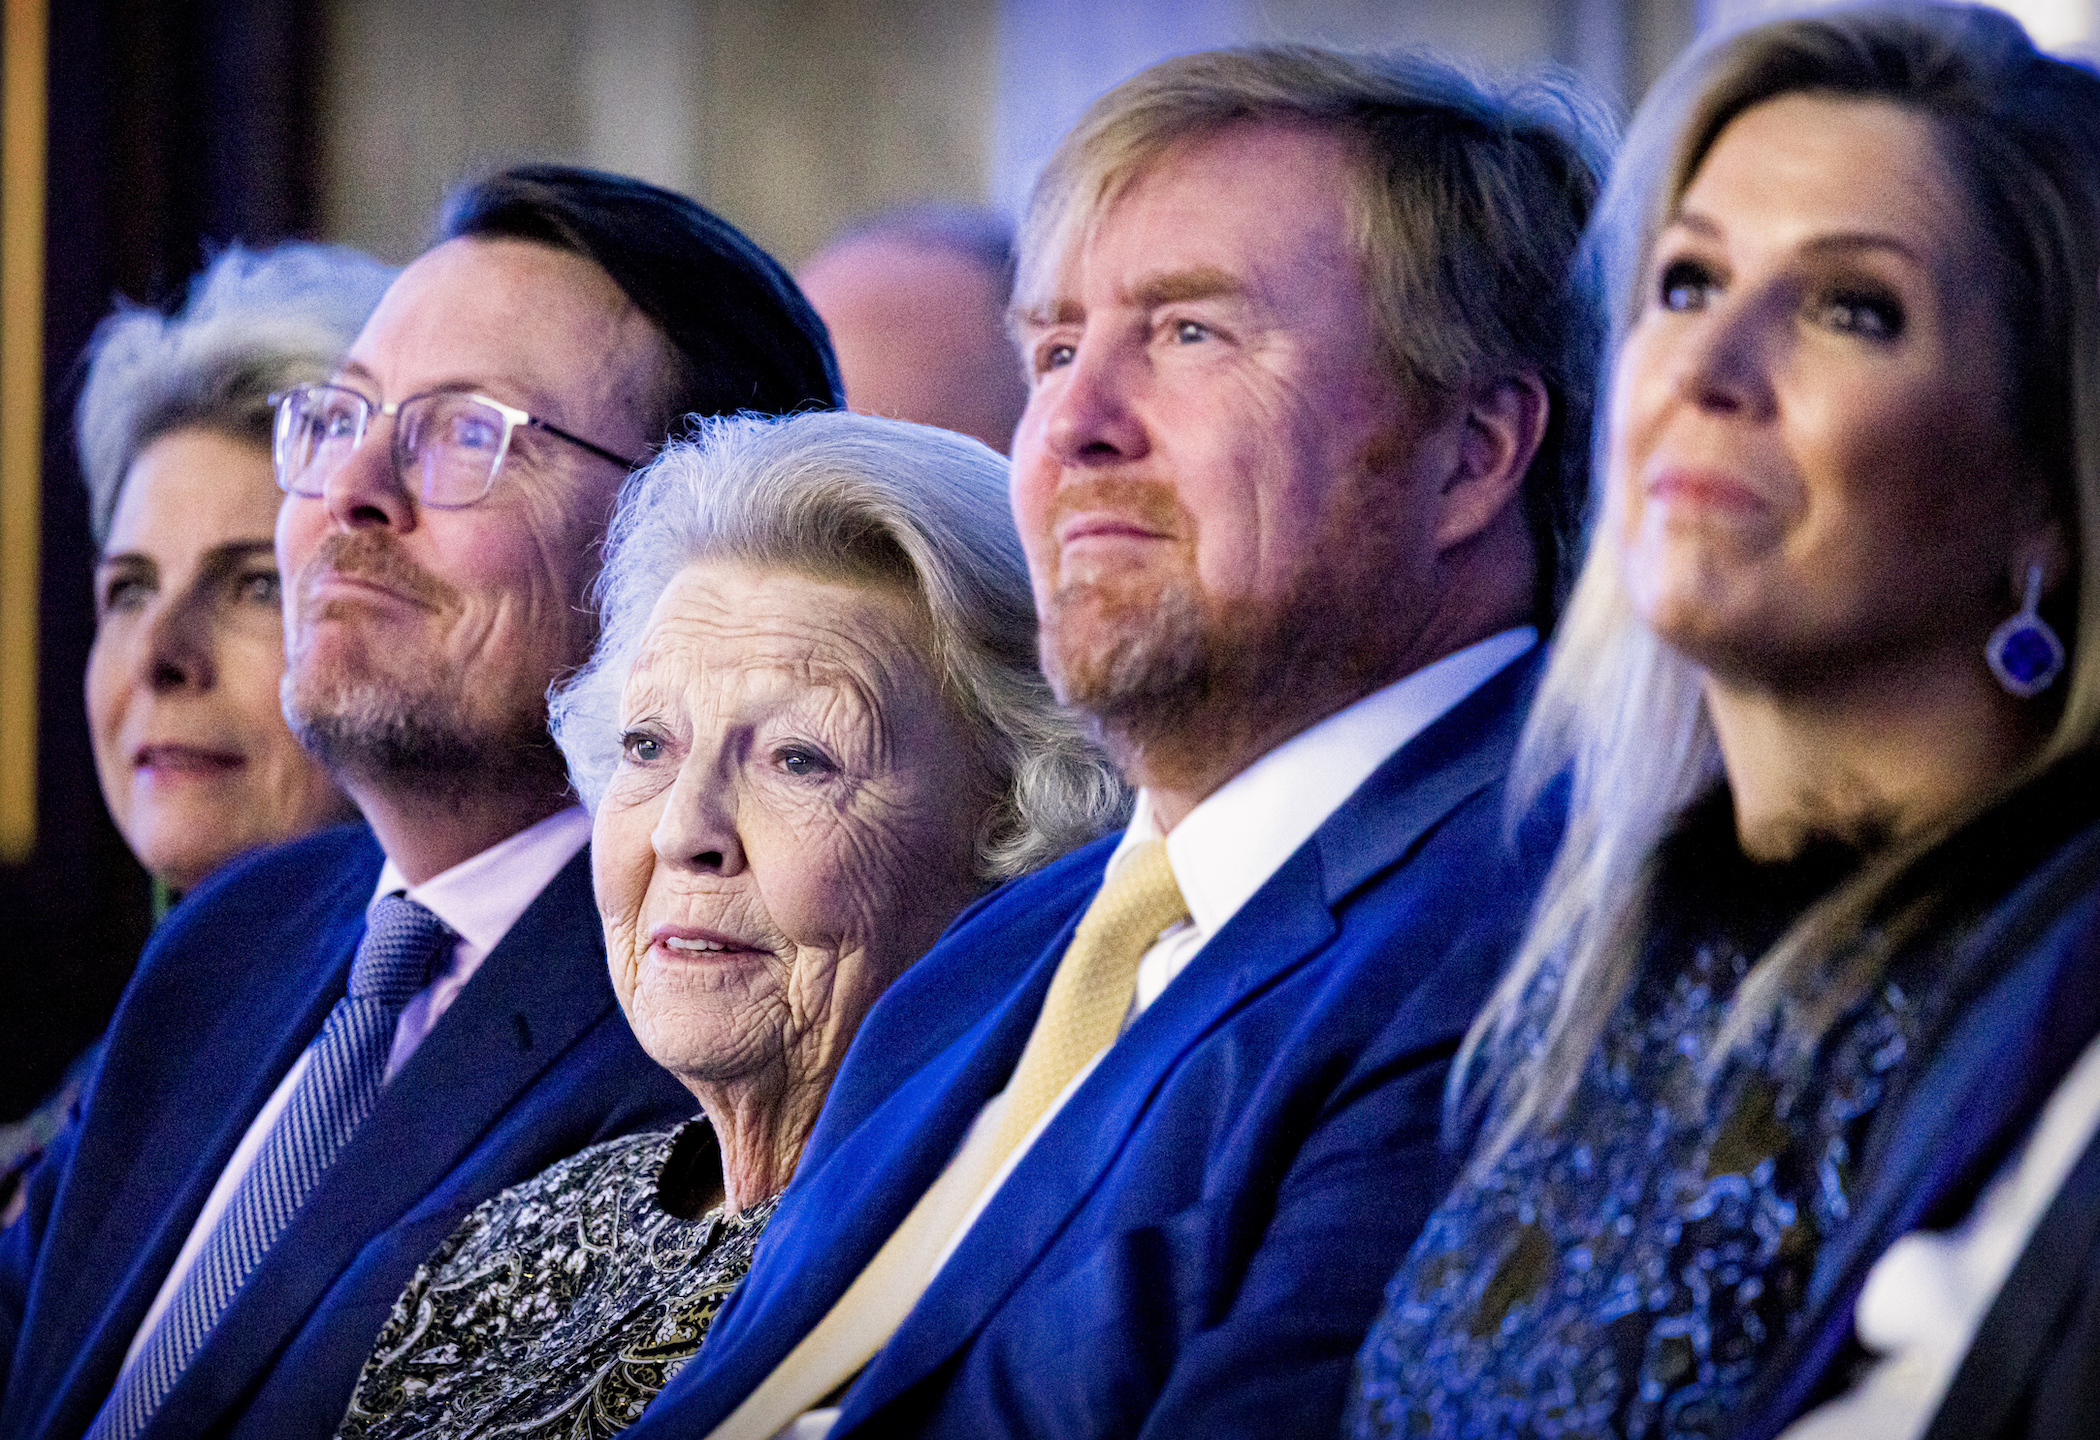 Dutch Royal Family Attends The Prince Claus Prize Award At The Royal Palace In Amsterdam